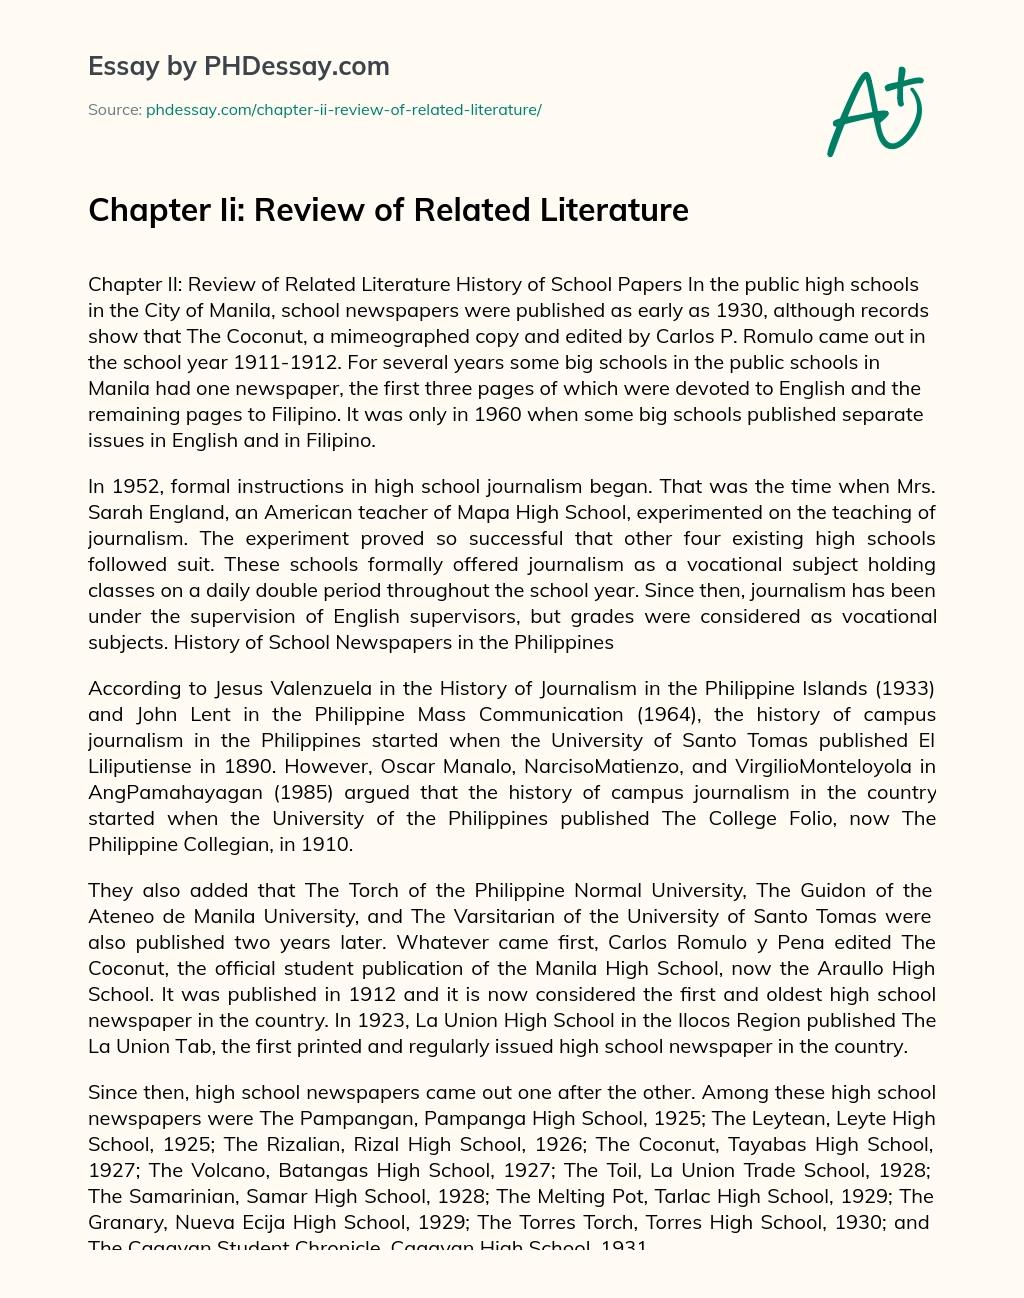 Chapter Ii: Review of Related Literature essay